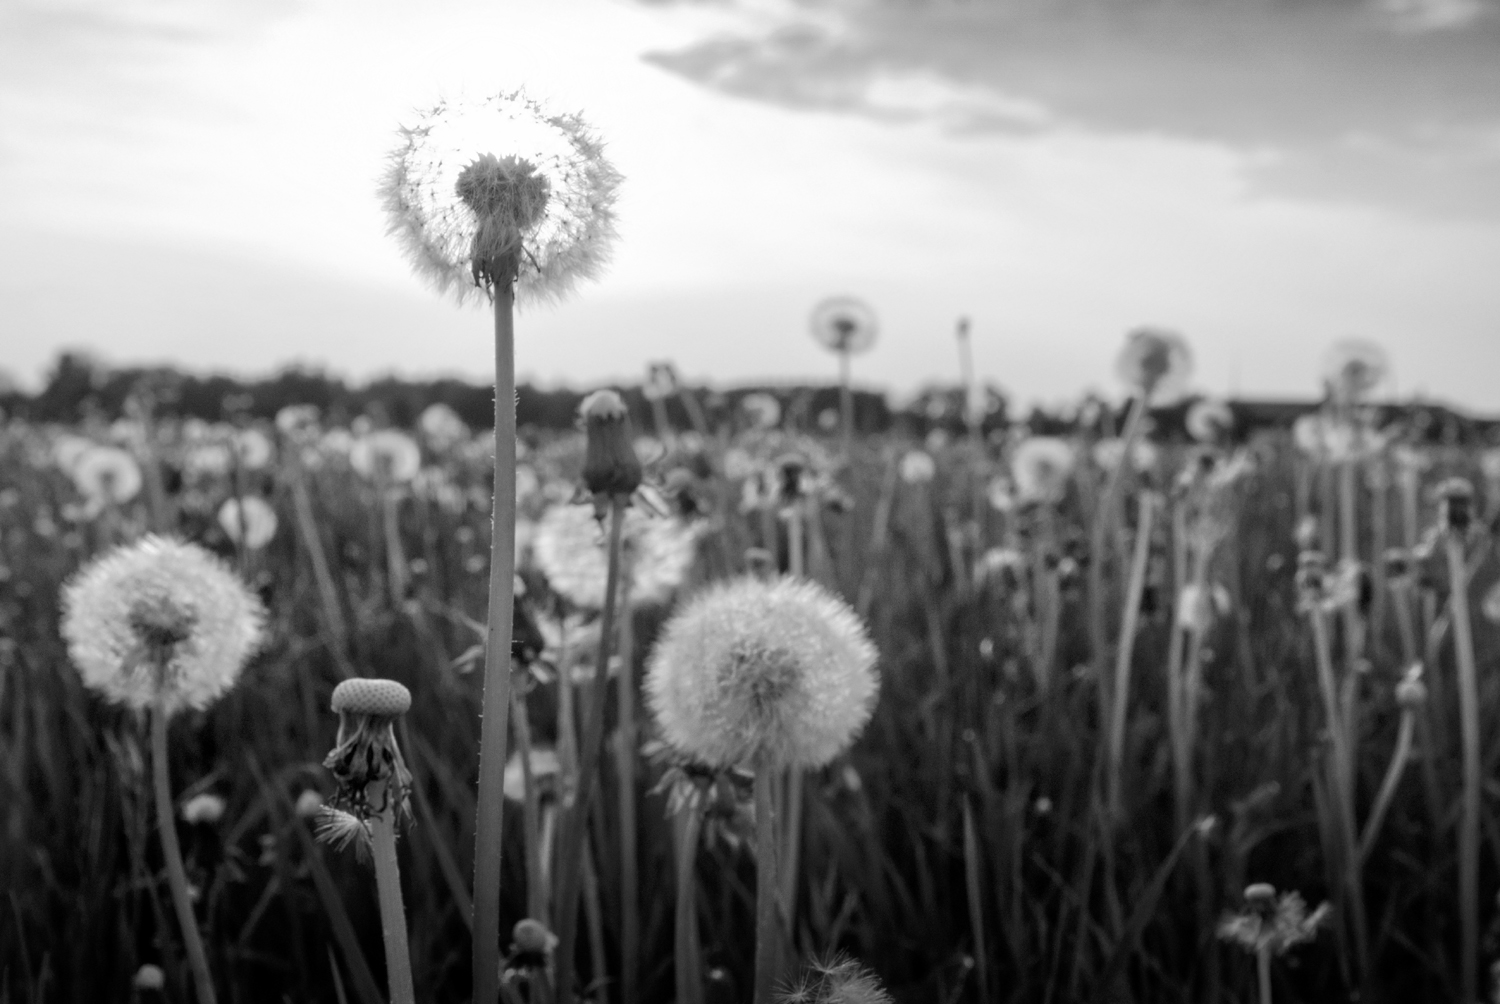 A photograph of dandelions to illustrate the poem "Two Seasons of Crashing" by Steve Subrizi, published in issue 33 of Neon